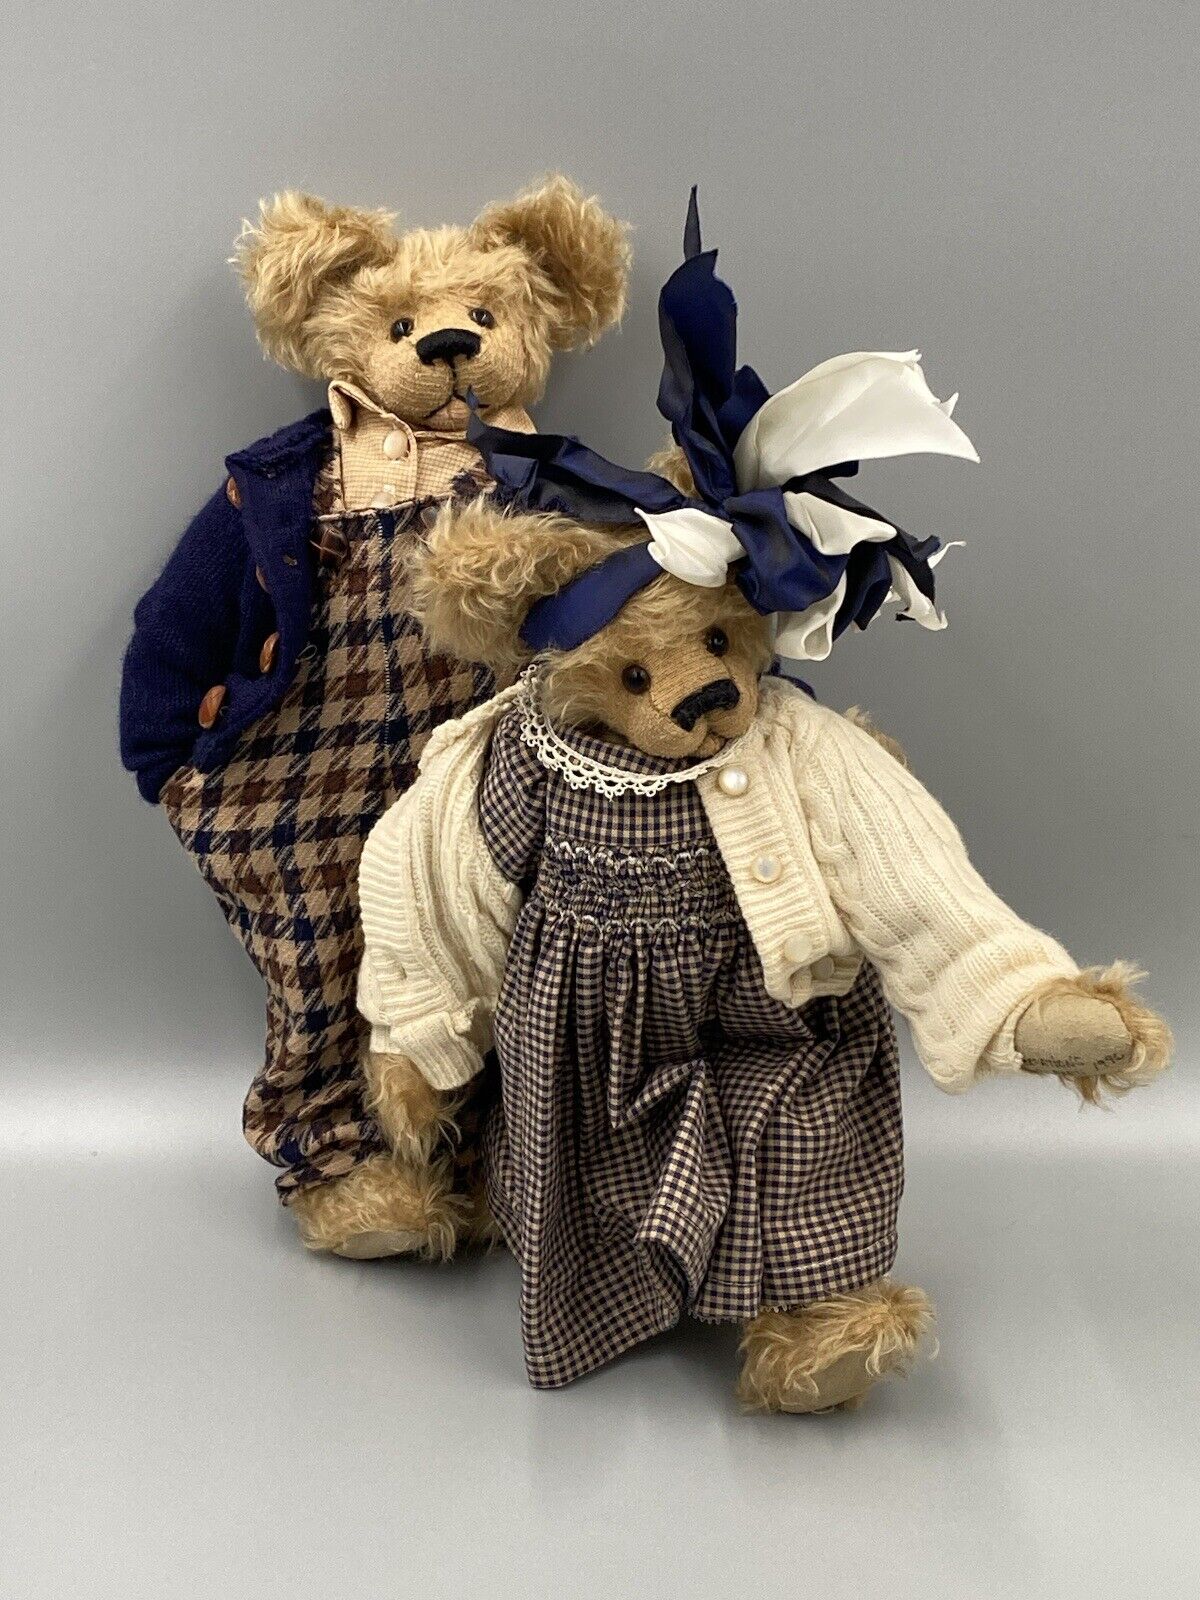 CREATIONS BY MARTI VTG 1996 ARTIST DESIGNER 18” Connected Teddy Bears In Plaid